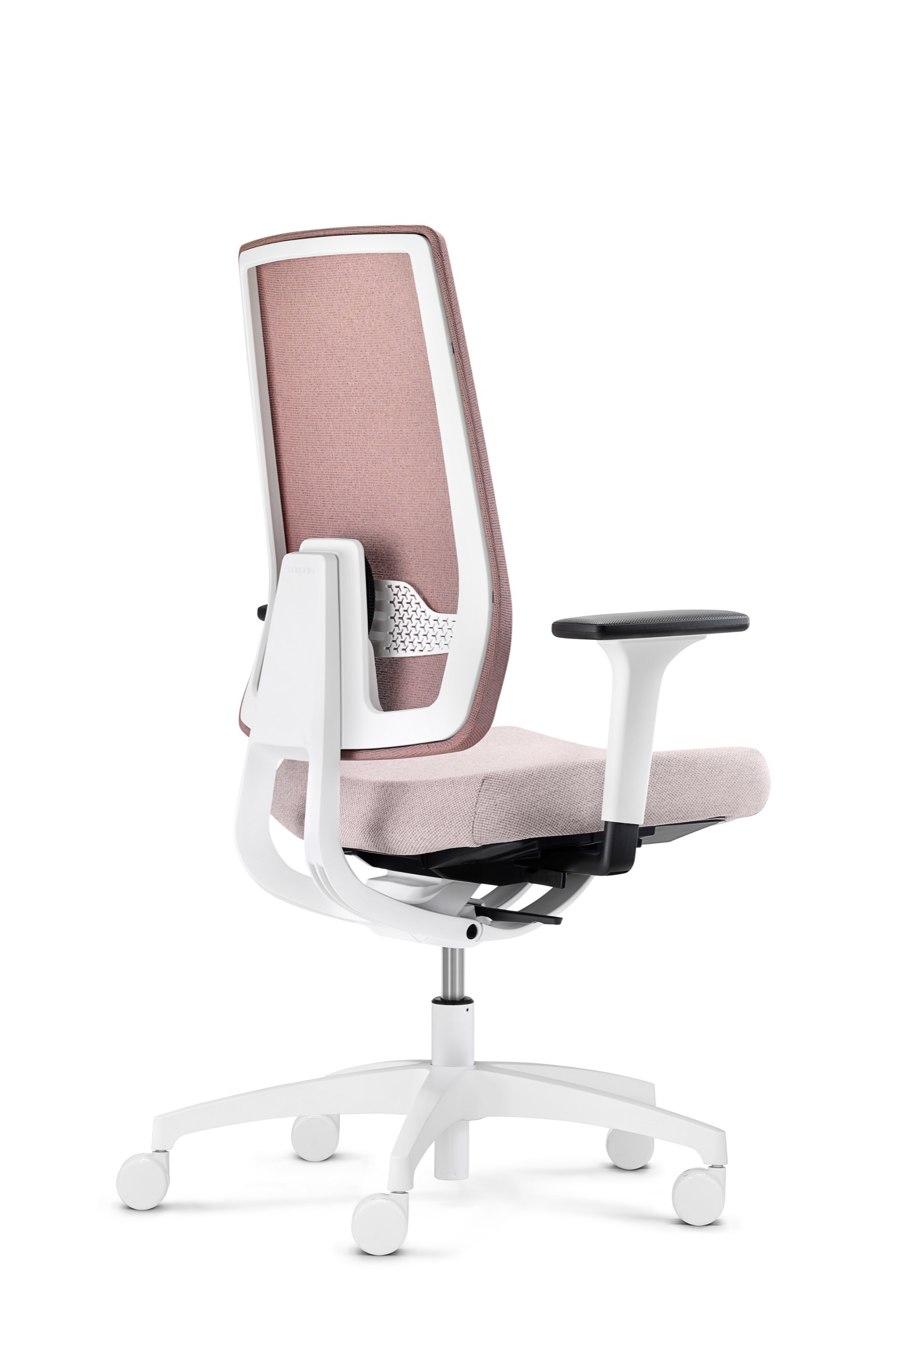 It's Automatic: Dauphin unveils the flexible office chair Indeed automatic | Novedades